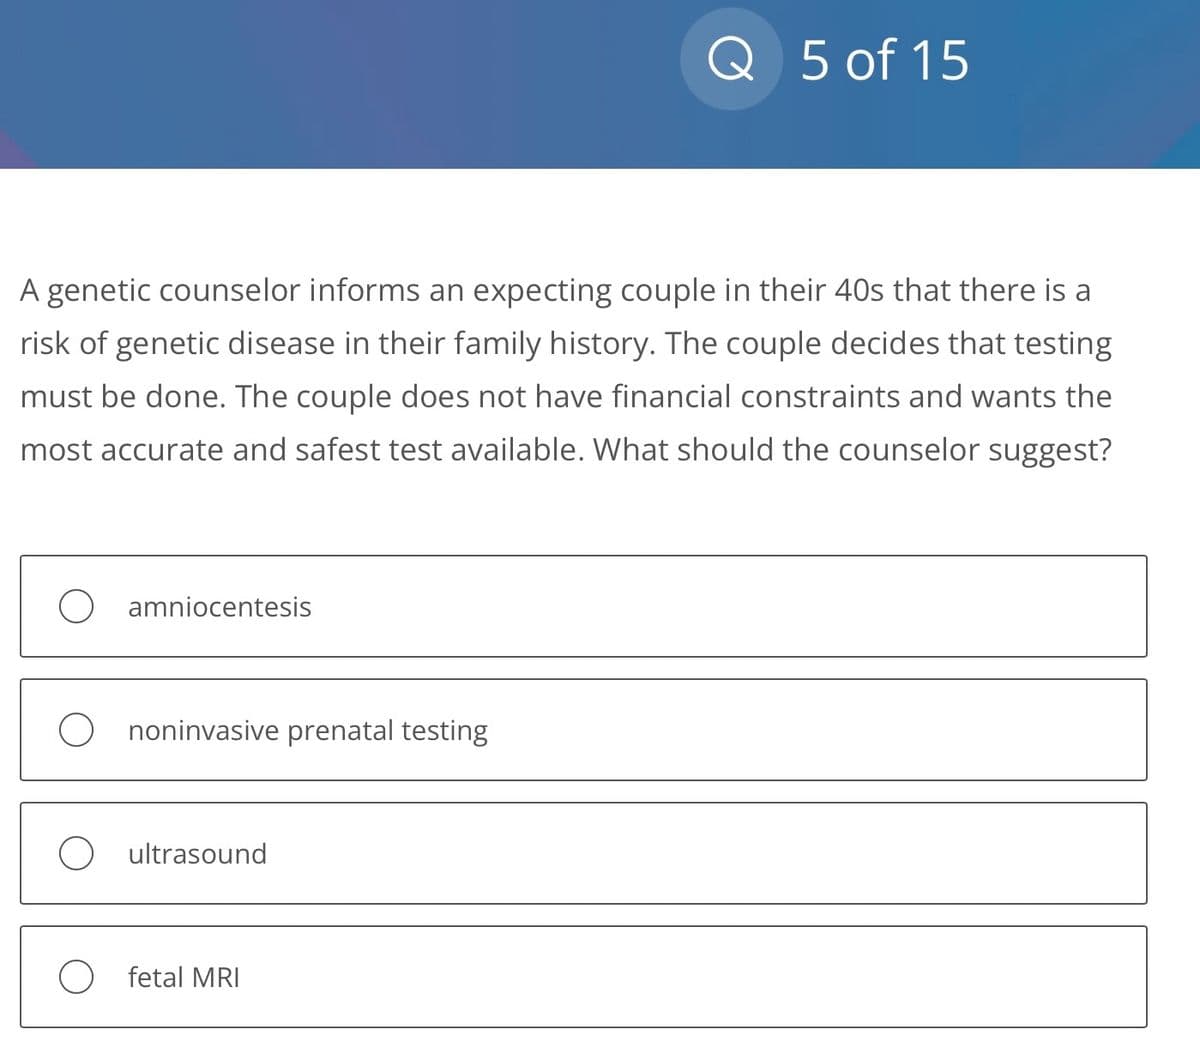 A genetic counselor informs an expecting couple in their 40s that there is a
risk of genetic disease in their family history. The couple decides that testing
must be done. The couple does not have financial constraints and wants the
most accurate and safest test available. What should the counselor suggest?
amniocentesis
Ononinvasive prenatal testing
O ultrasound
Q 5 of 15
O fetal MRI